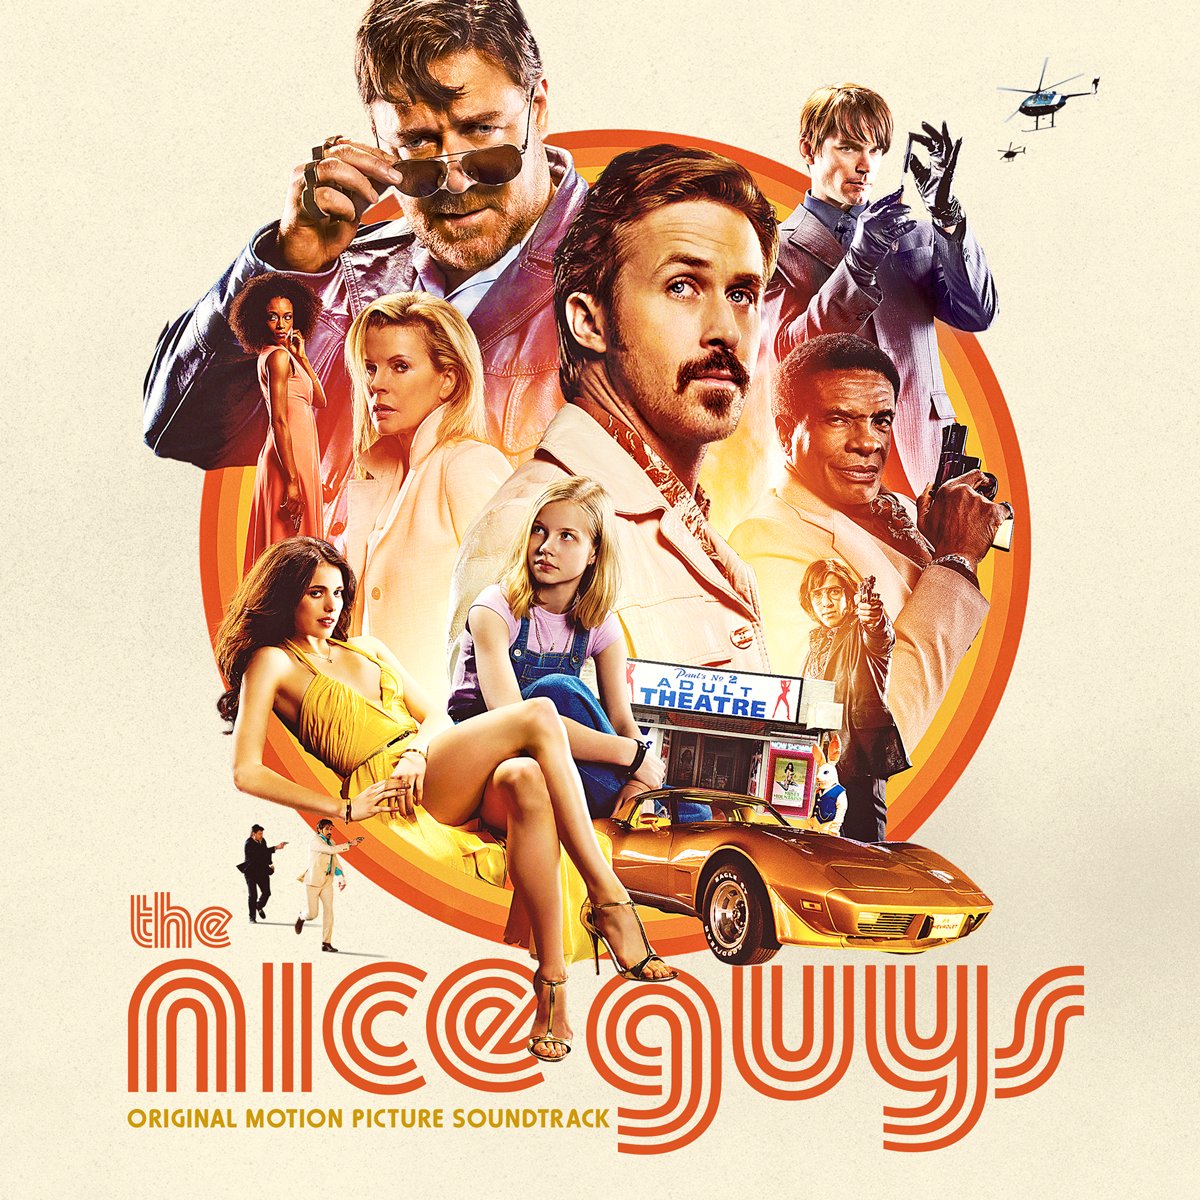 RT @LakeshoreRecs: #NewMusicFriday Get #TheNiceGuys Soundtrack feat. Top Tunes of the 1970s: https://t.co/XMSacqR74z @wbpictures https://t.…